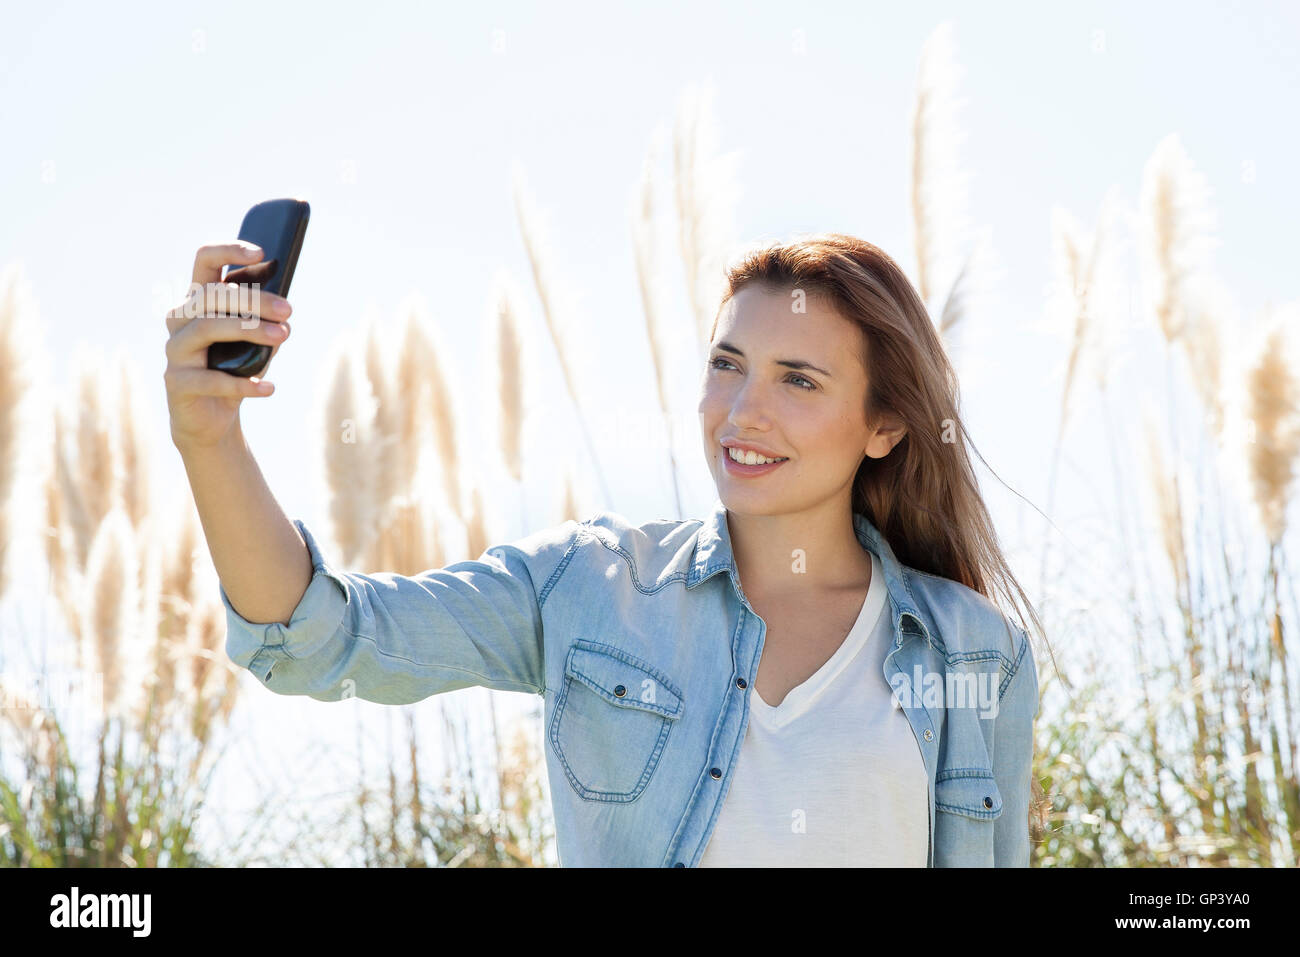 Woman posing for a selfie outdoors Stock Photo